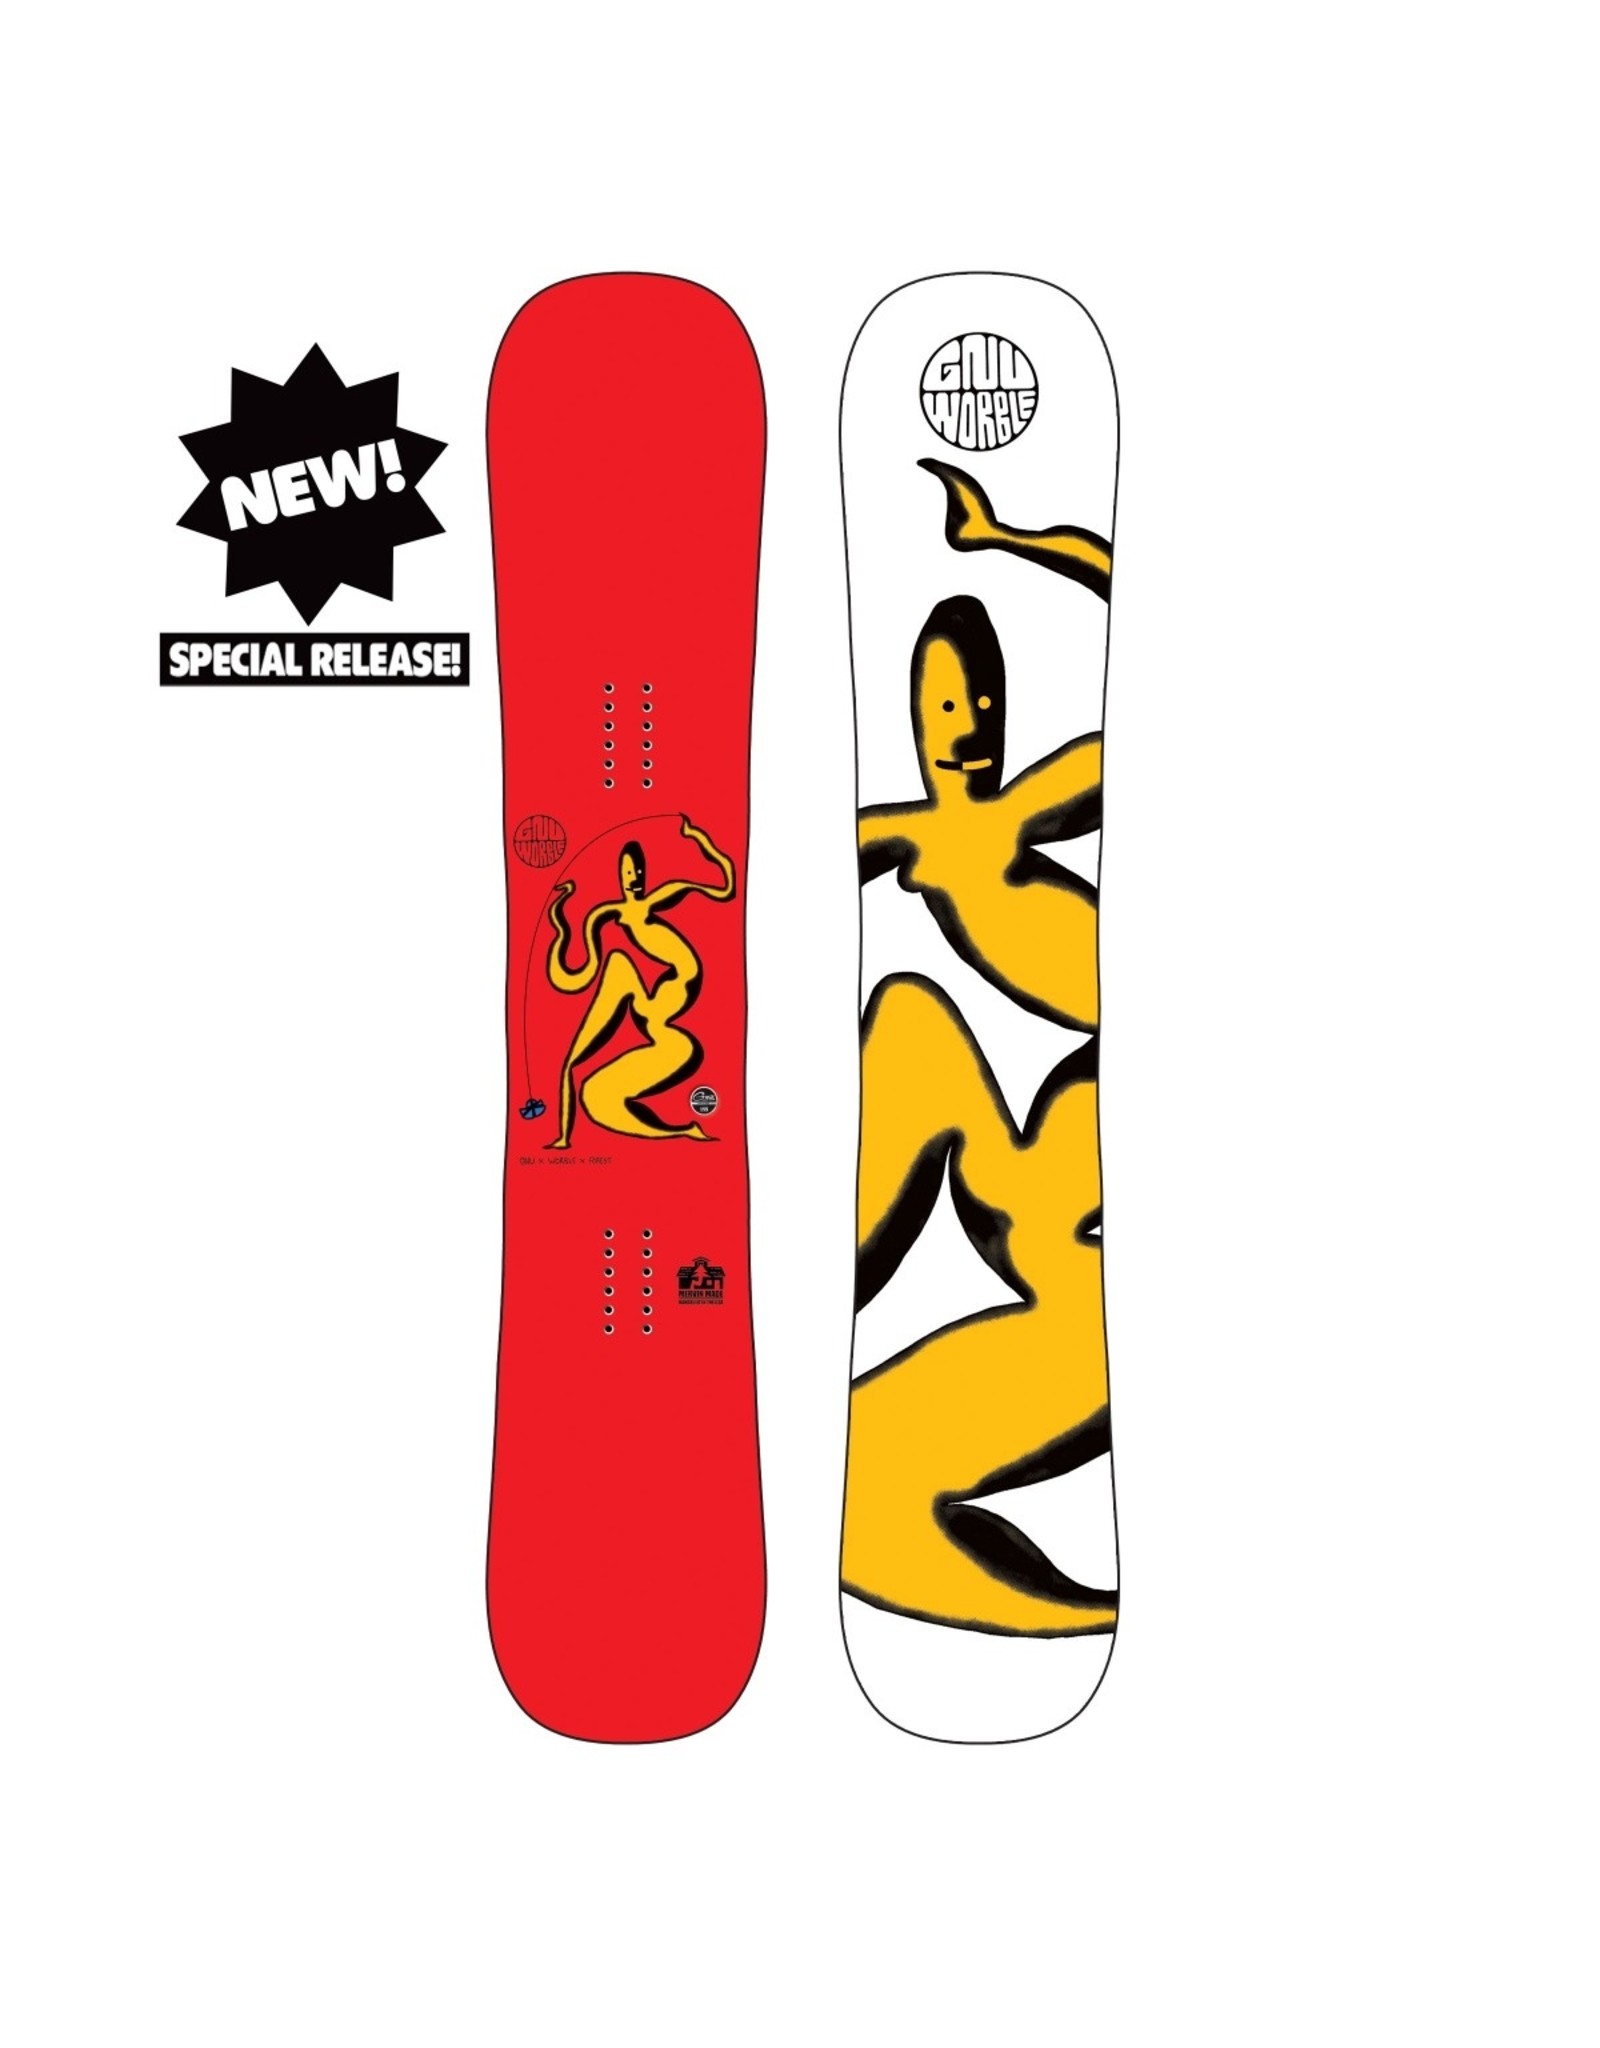 GNU Headspace Worble Edition Snowboard (152)